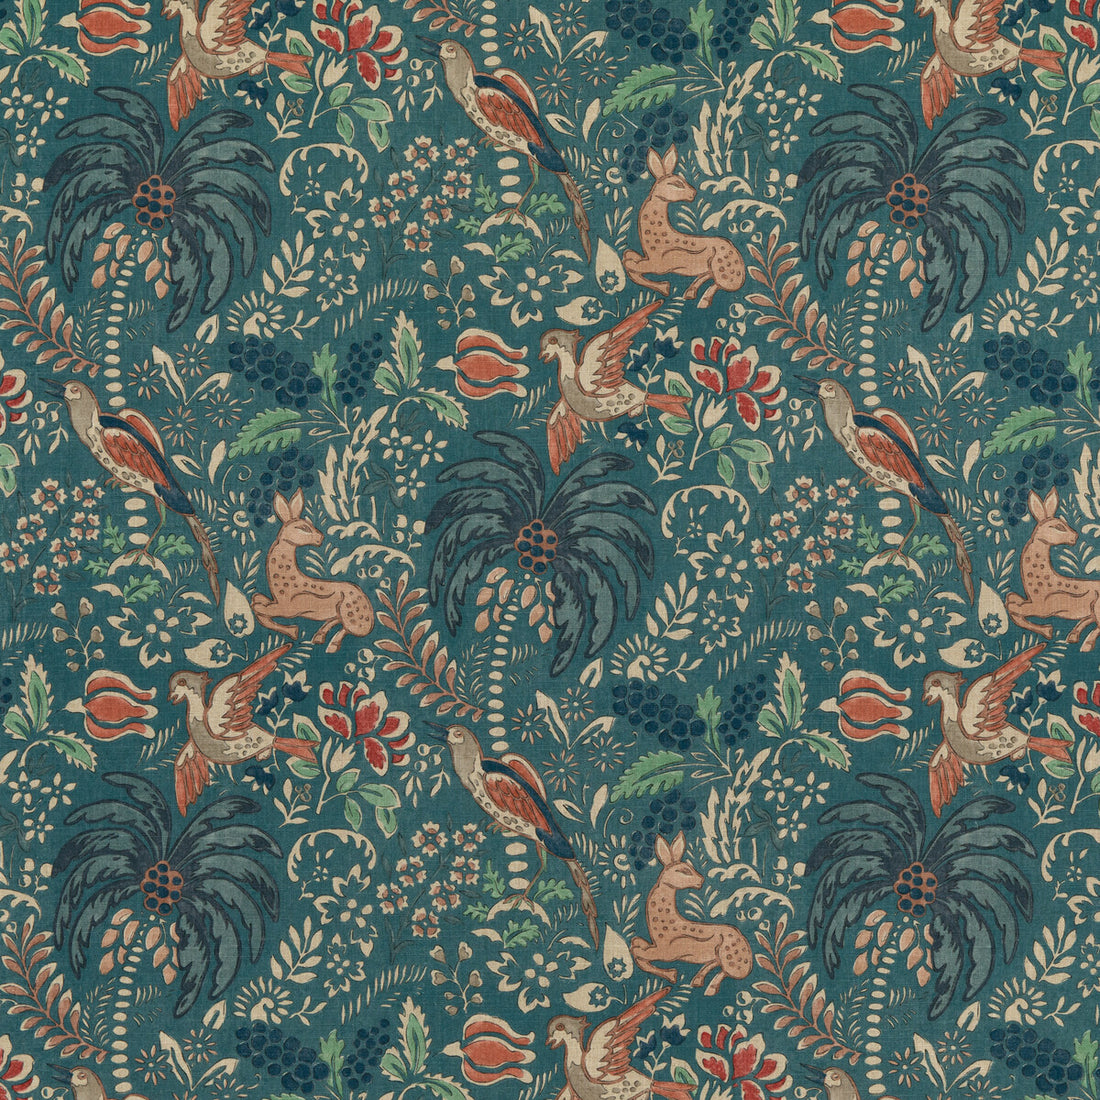 Fantasia fabric in teal color - pattern FD308.R122.0 - by Mulberry in the Modern Country I collection